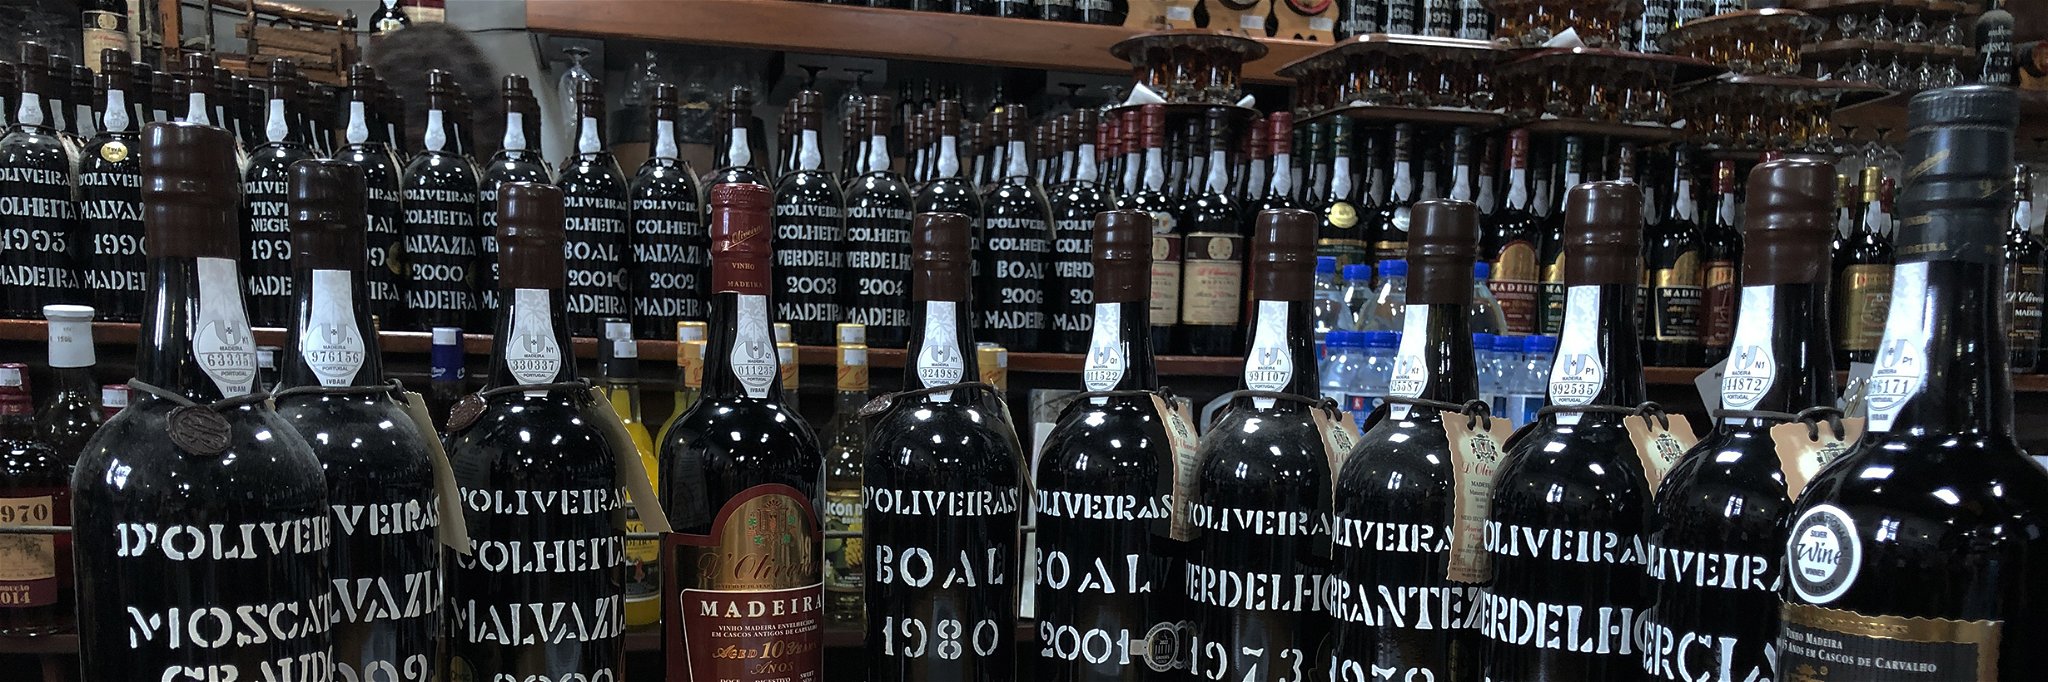 Pereira D’Oliveira has a considerable stock of rare old vintage wine.